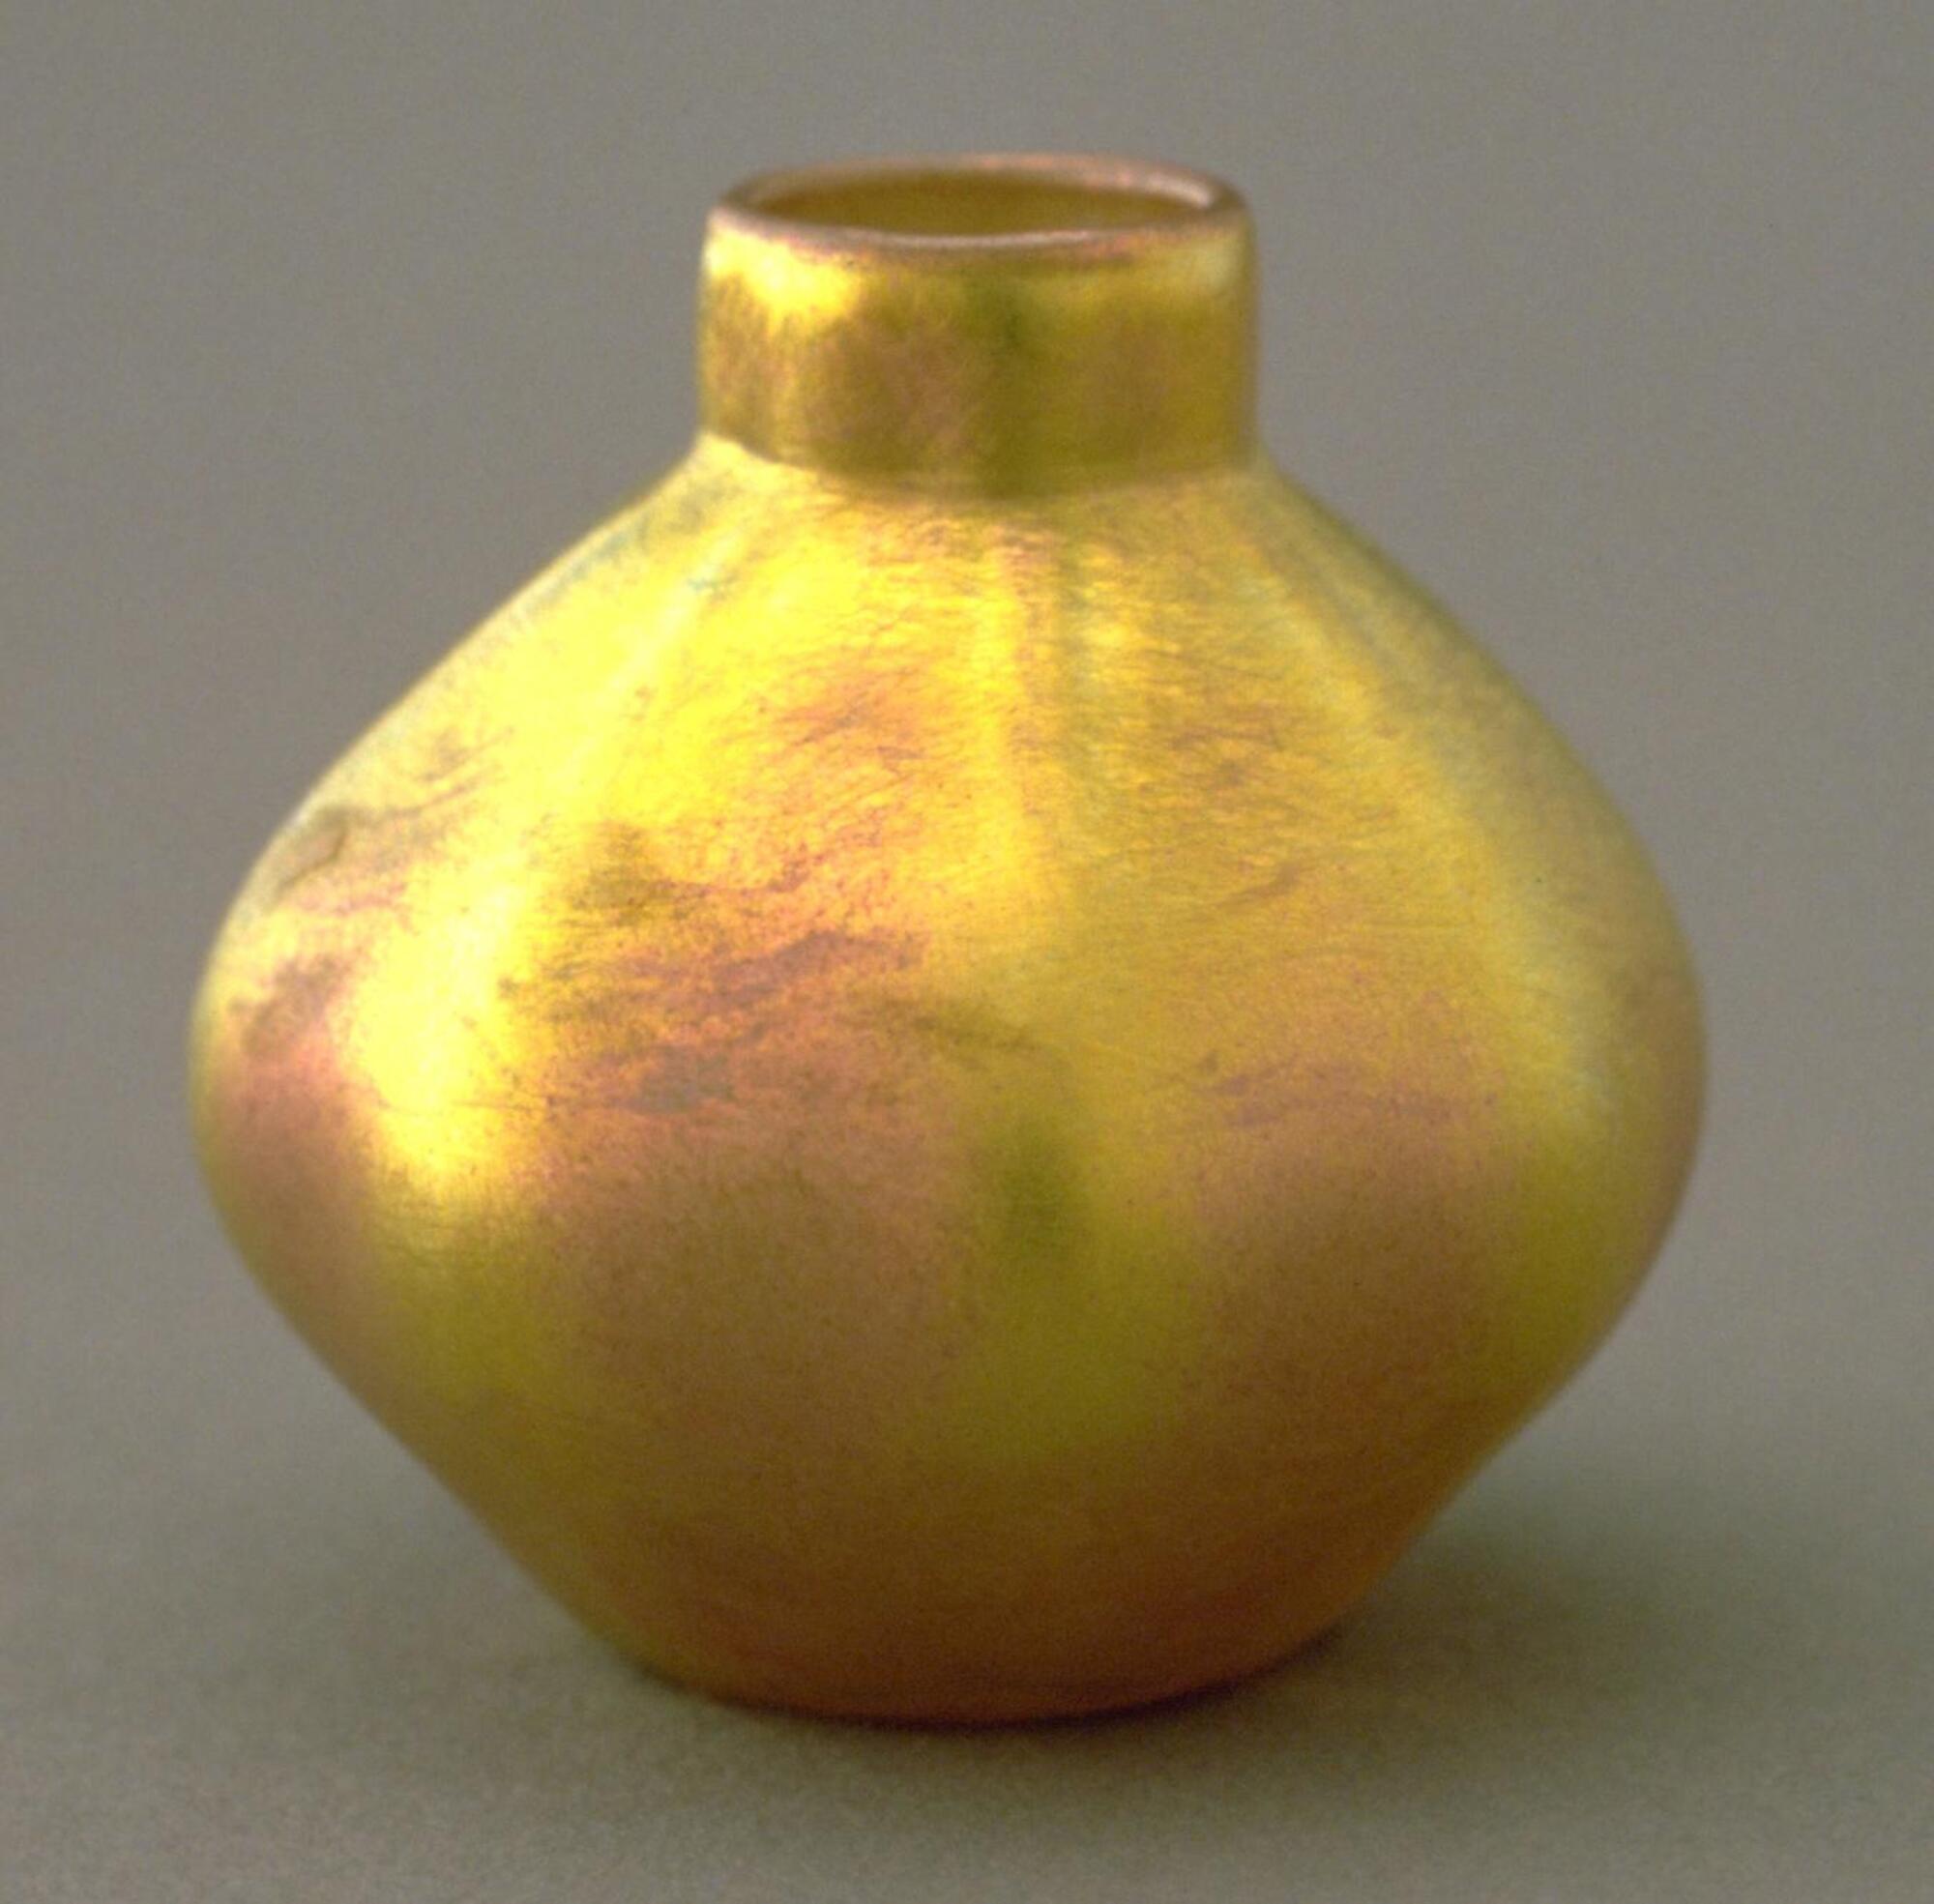 Miniature vase of irregular, slightly globular form; vessel has suggestions of lobes and has a narrow neck. Exterior of vase exhibits a deep yellow and pinkish iridescent surface with an overall effect of rich color and natural aysmmetry.